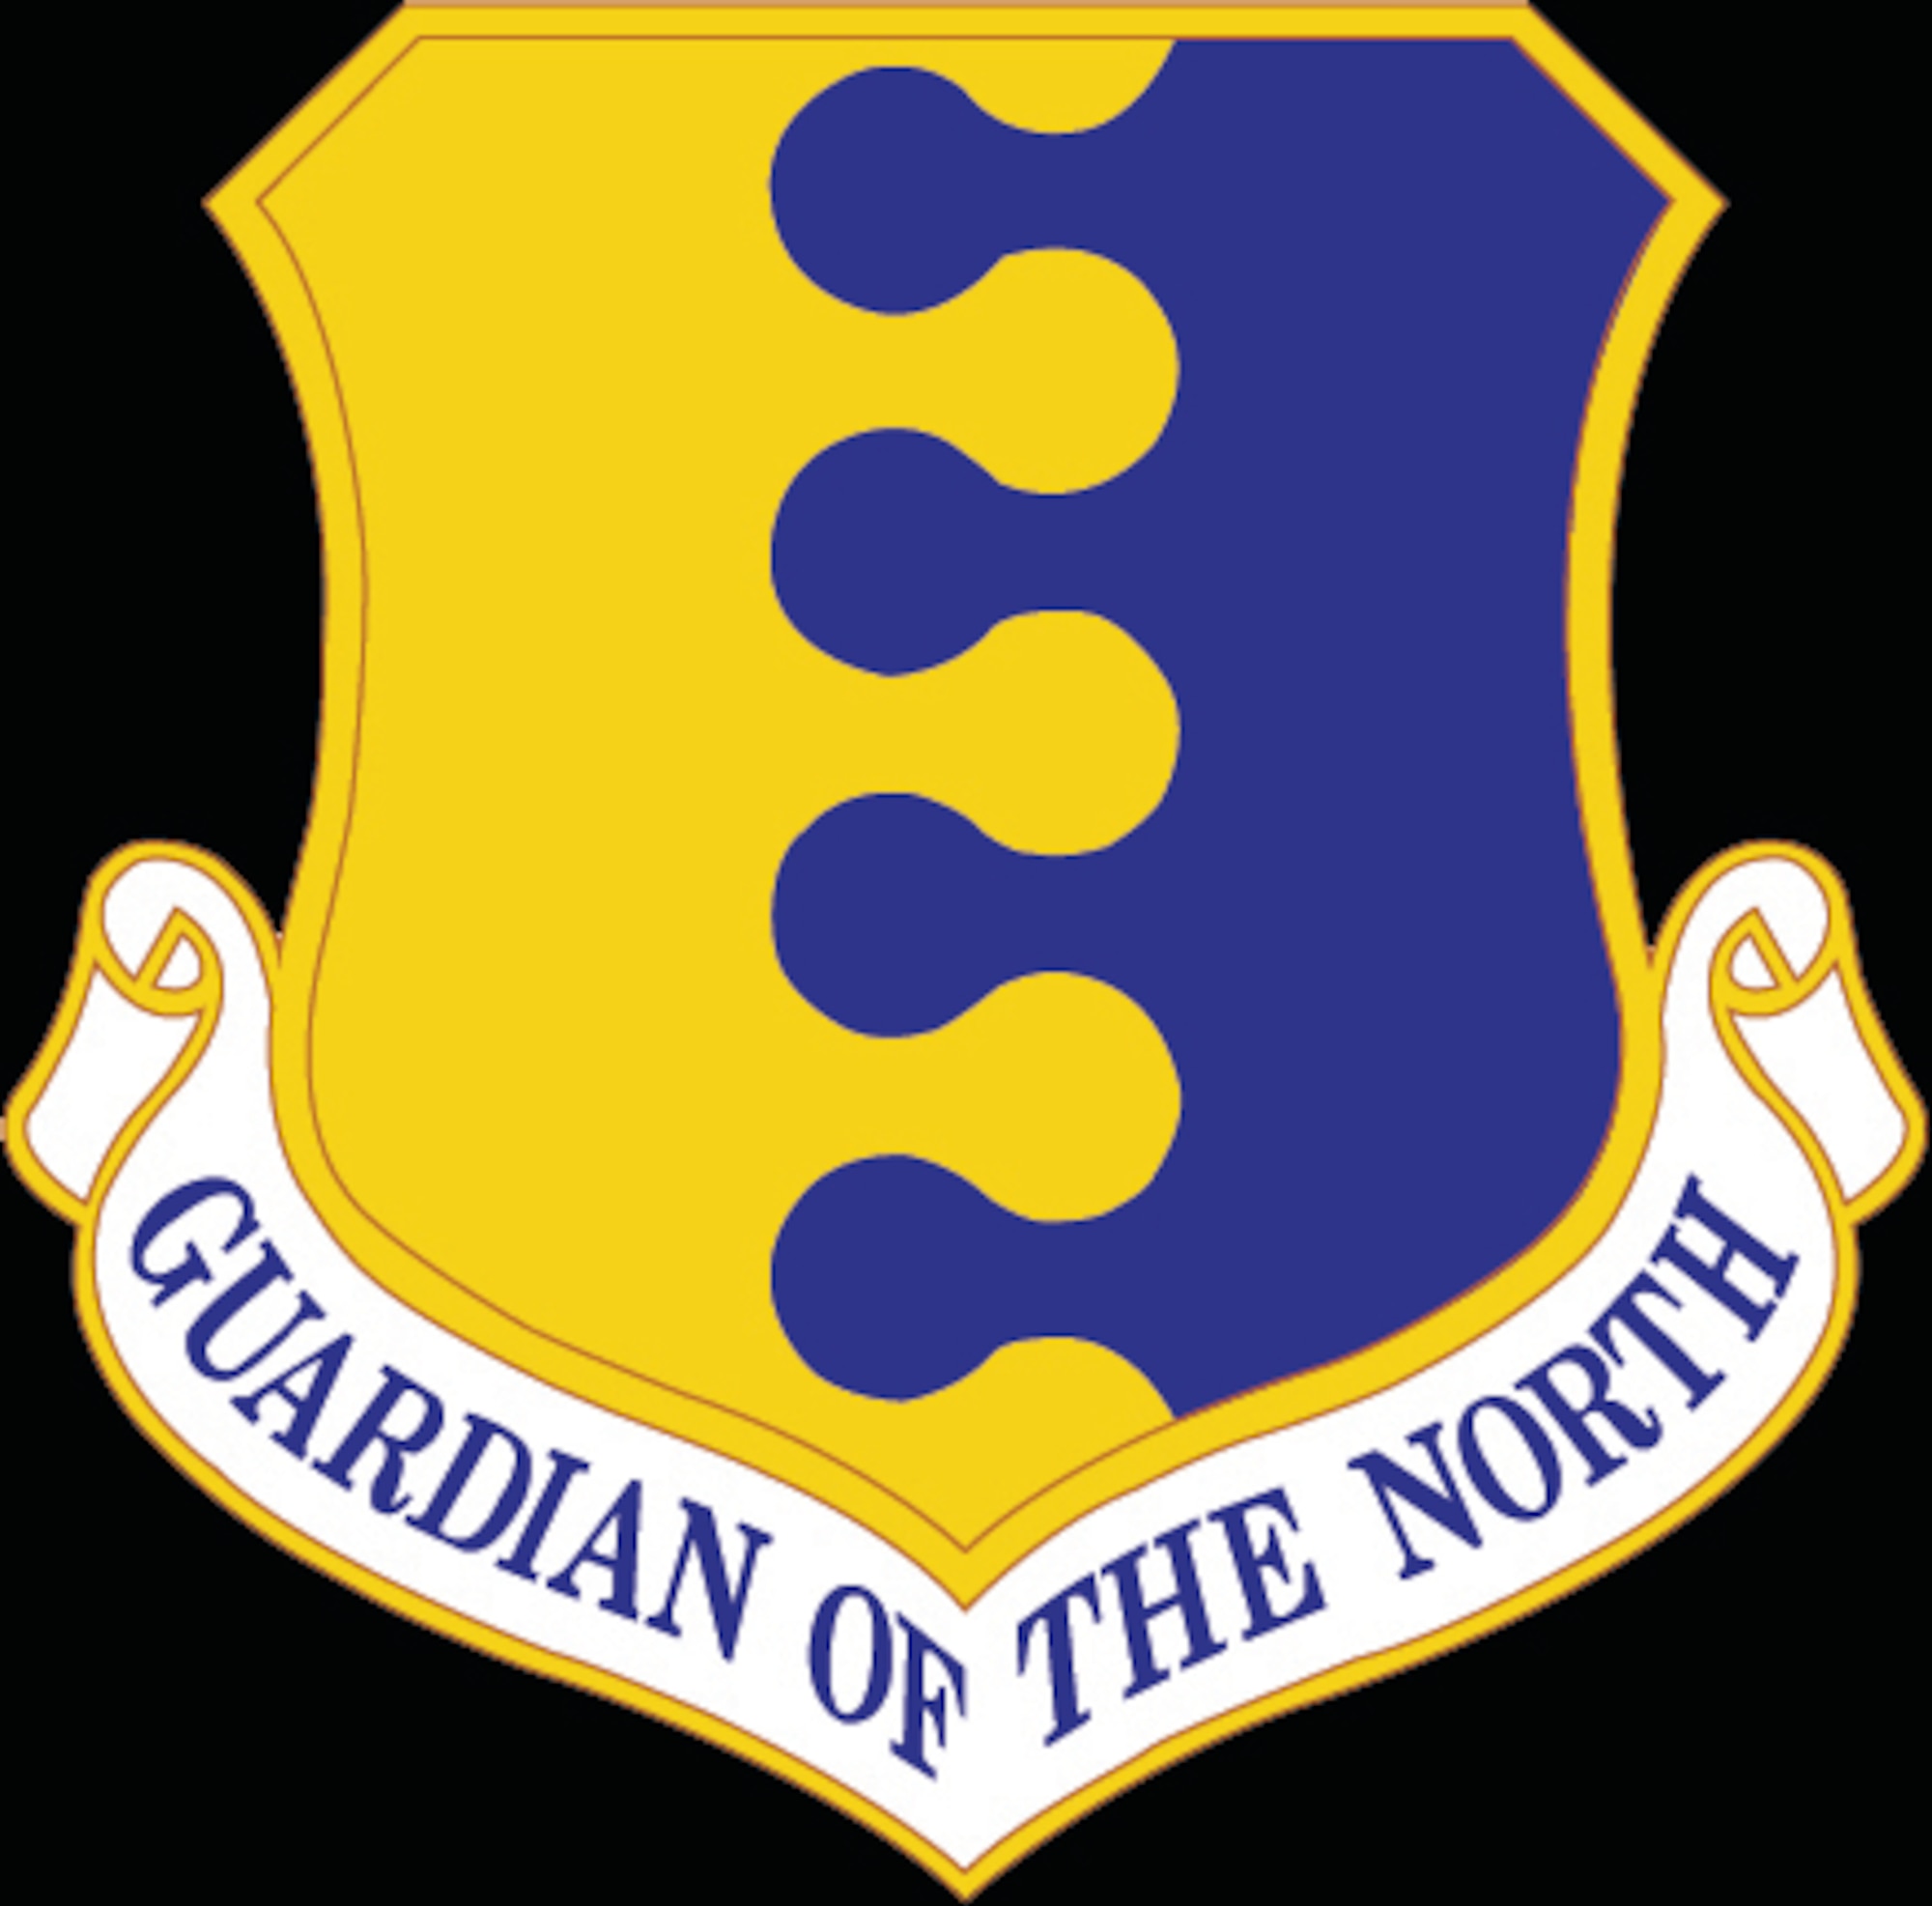 Blue and yellow shield with Guardian of the North text in a banner along the bottom.